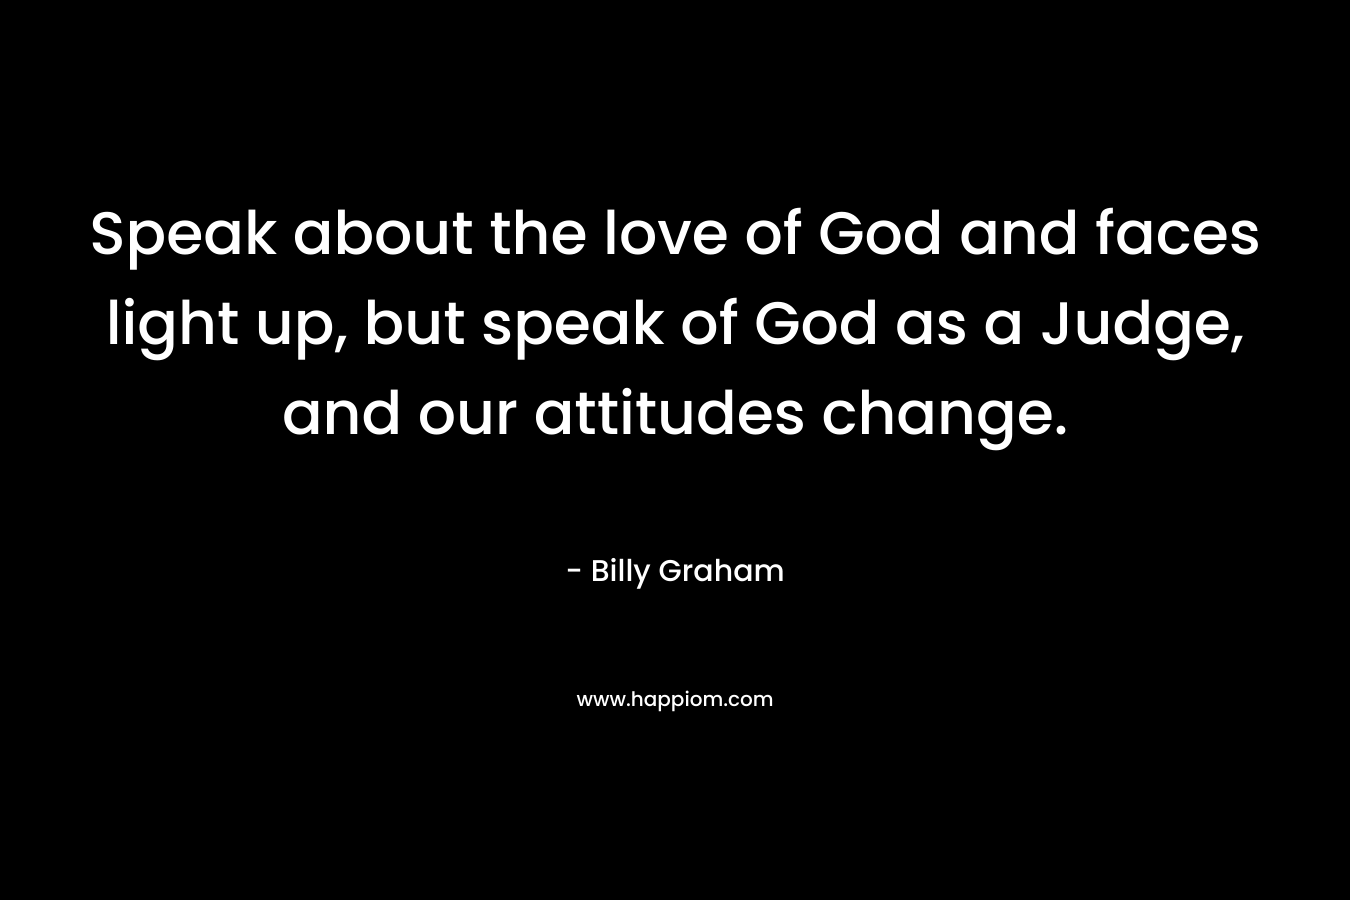 Speak about the love of God and faces light up, but speak of God as a Judge, and our attitudes change.